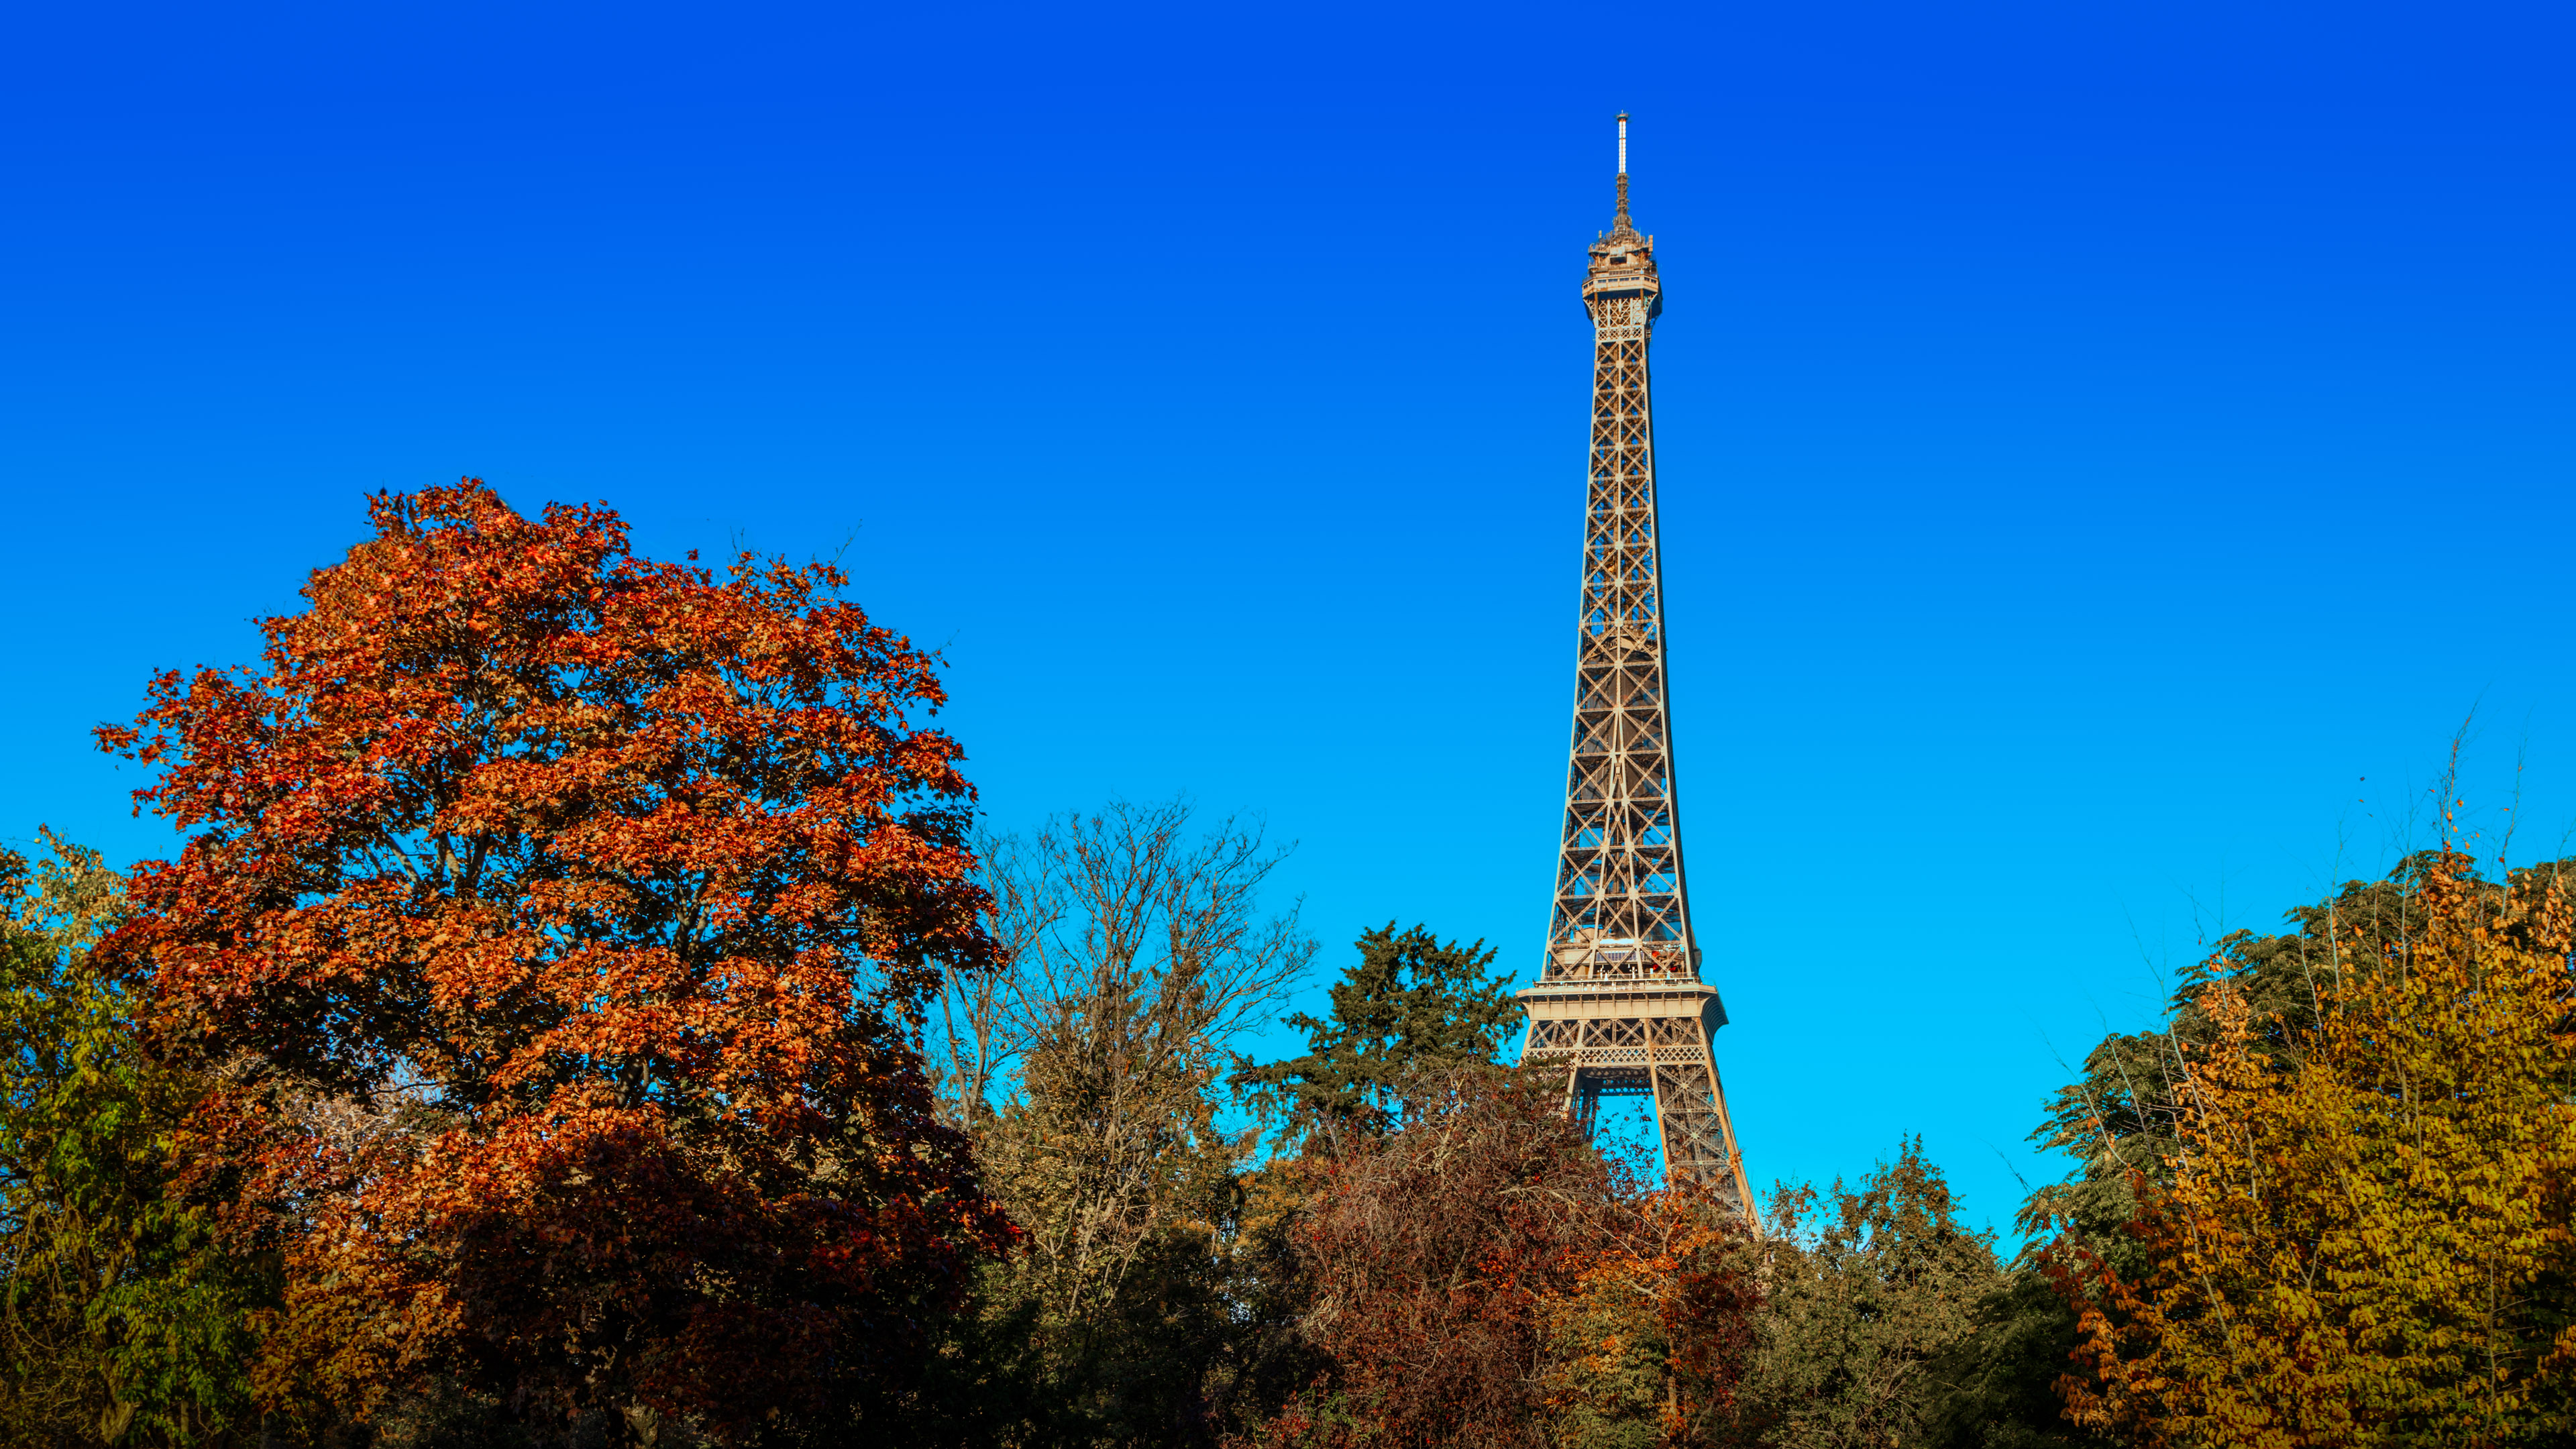 Transform your PC with our free desktop wallpaper, showcasing the iconic Eiffel Tower in Paris, a symbol of elegance and architectural brilliance.